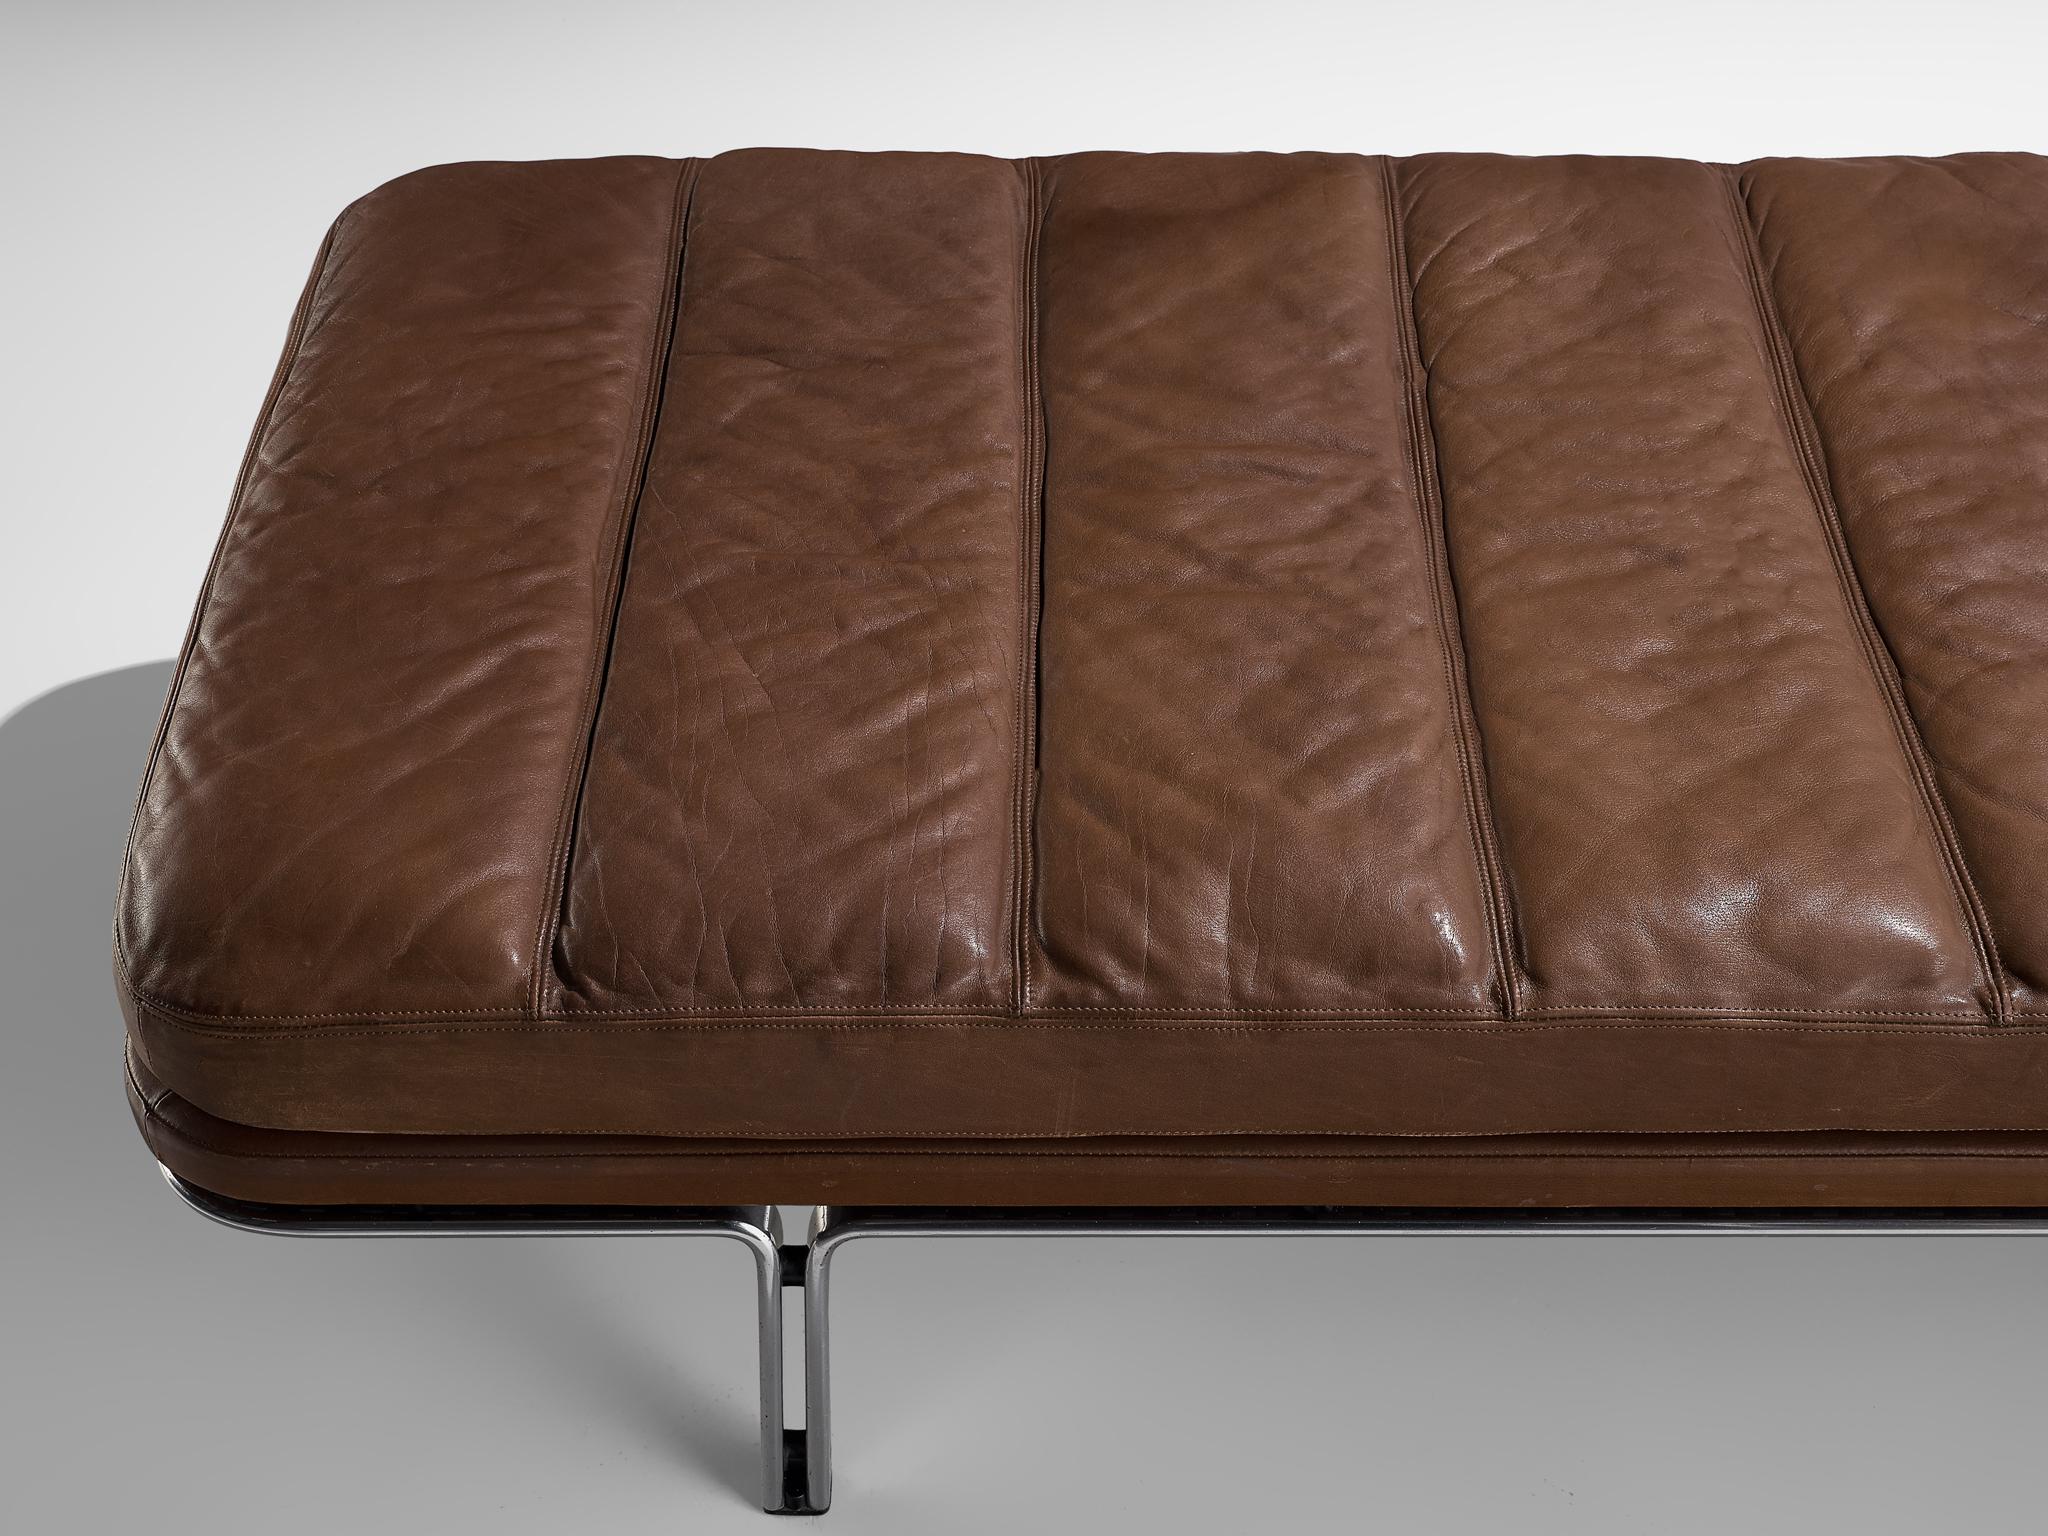 Steel Horst Brüning Daybed in Original Brown Leather and Chrome